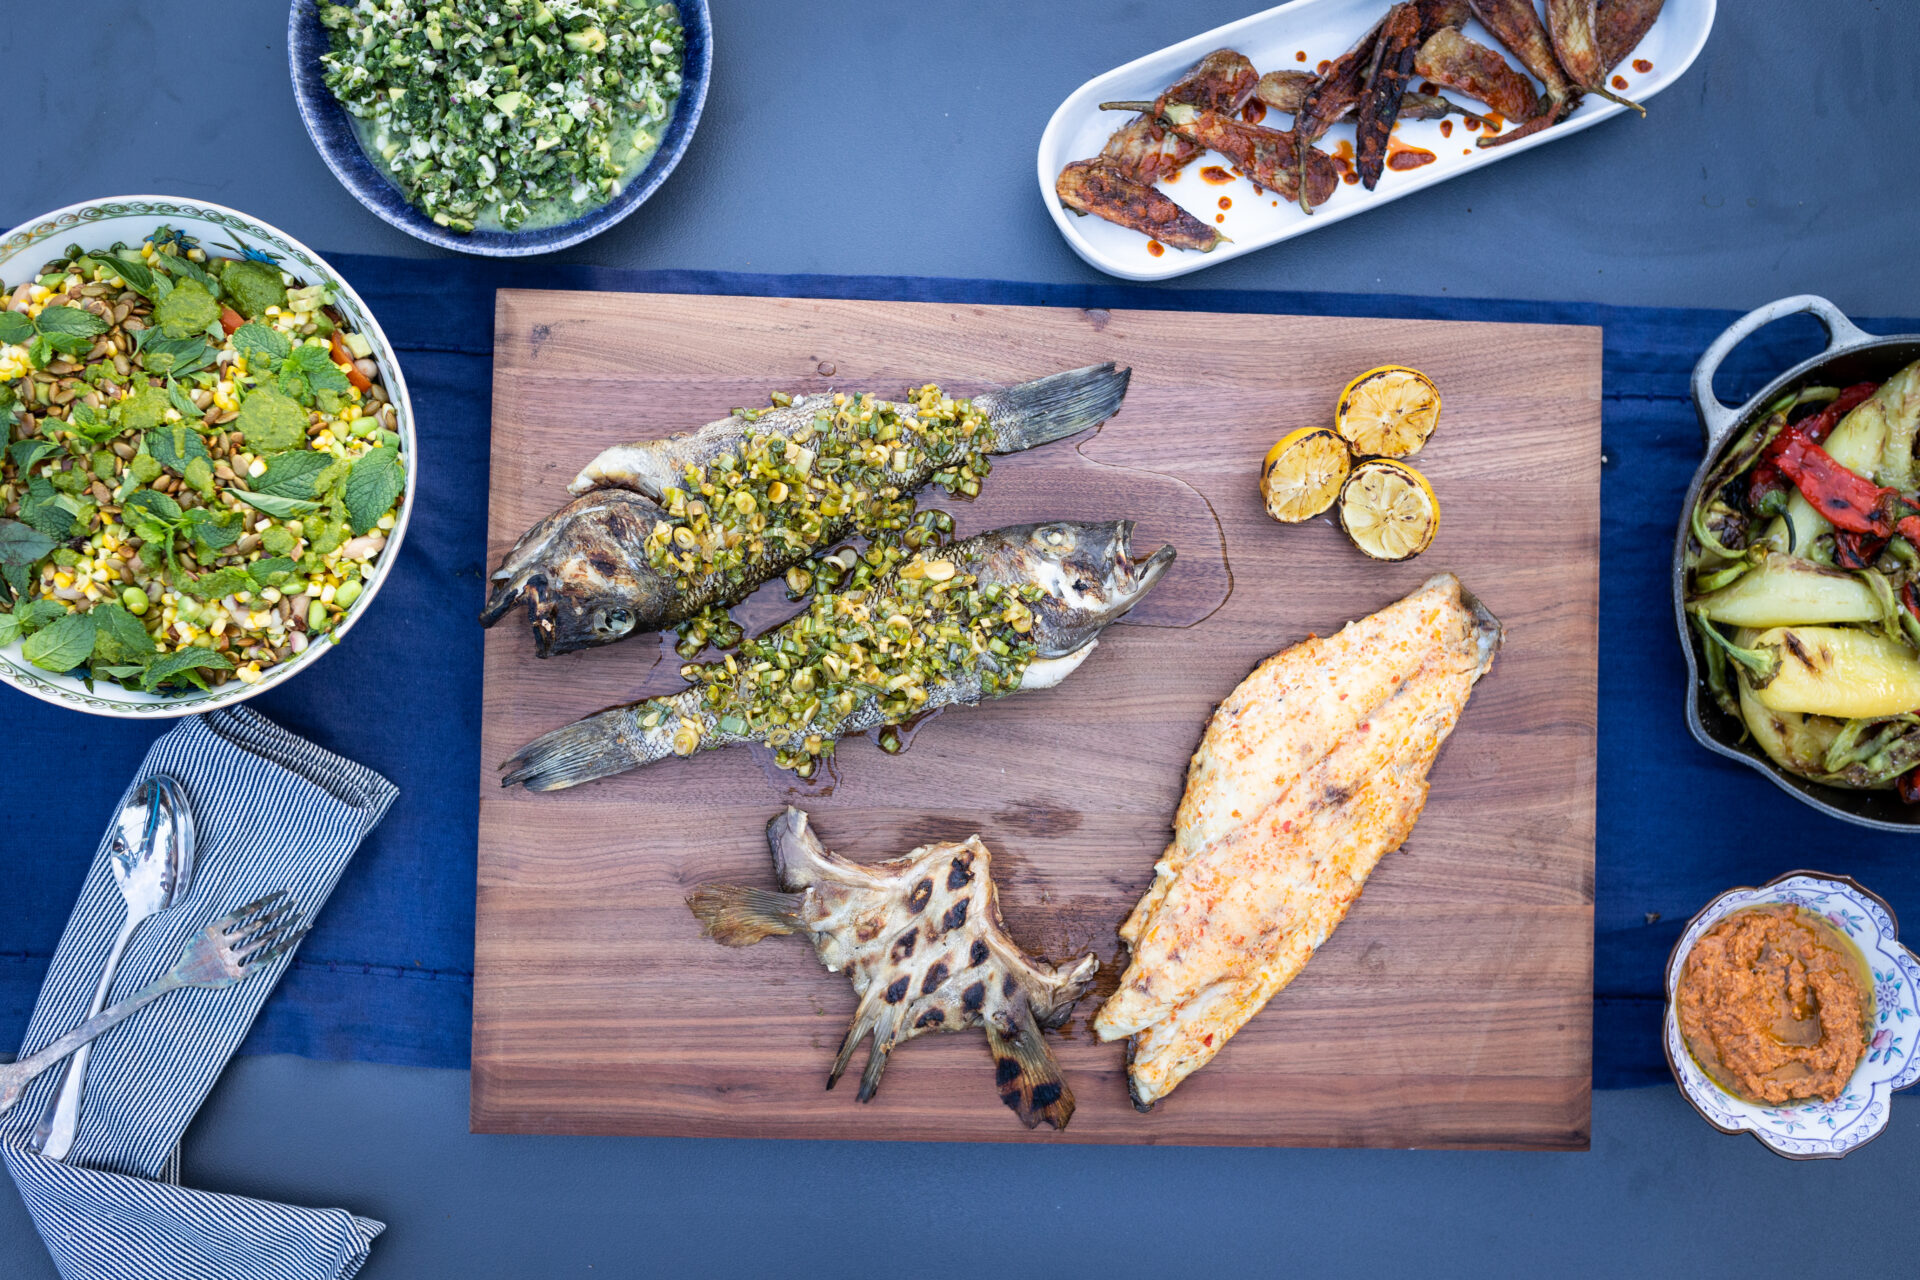 A table spread with whole fish, fillets, a salad, and spread for an intimate dinner